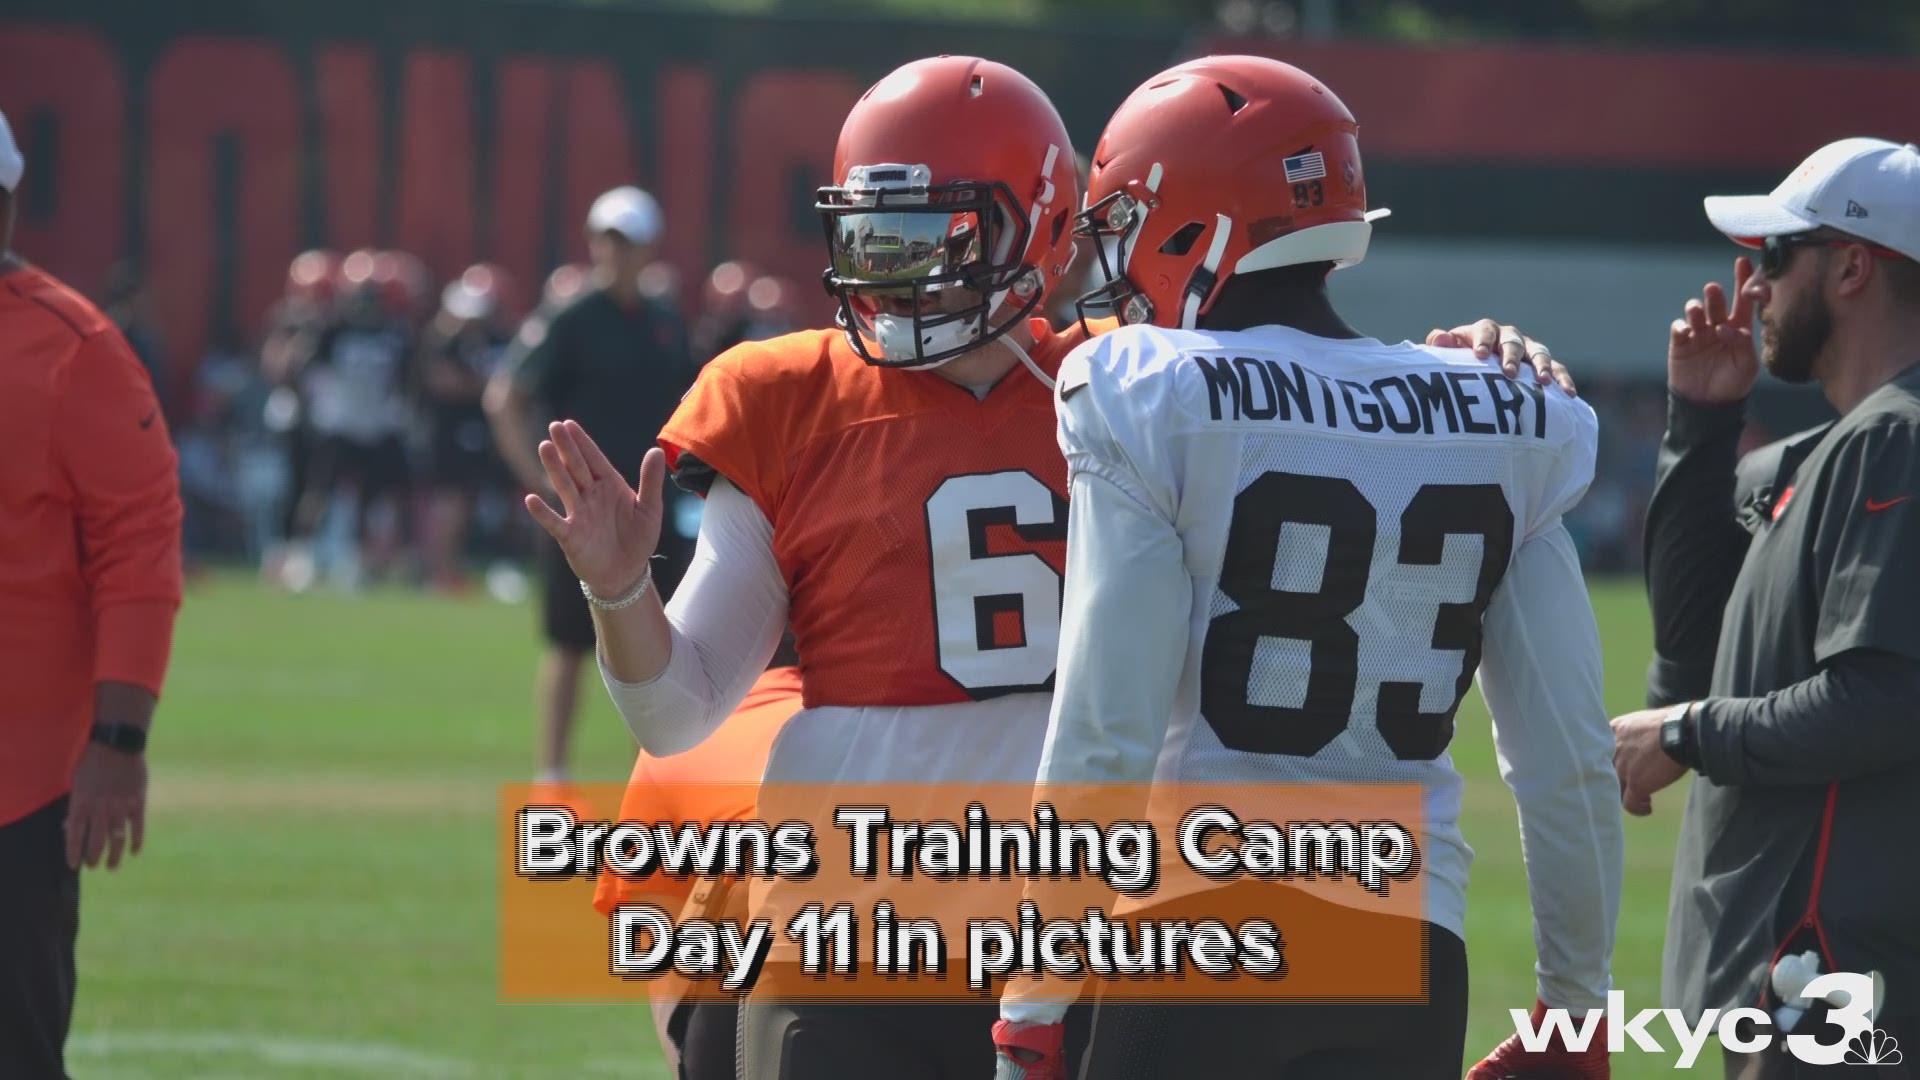 The Browns final practice before their first preseason game on Thursday against the Redskins.  Check out the sights and sounds from day 11 of Cleveland Browns training camp in Berea.